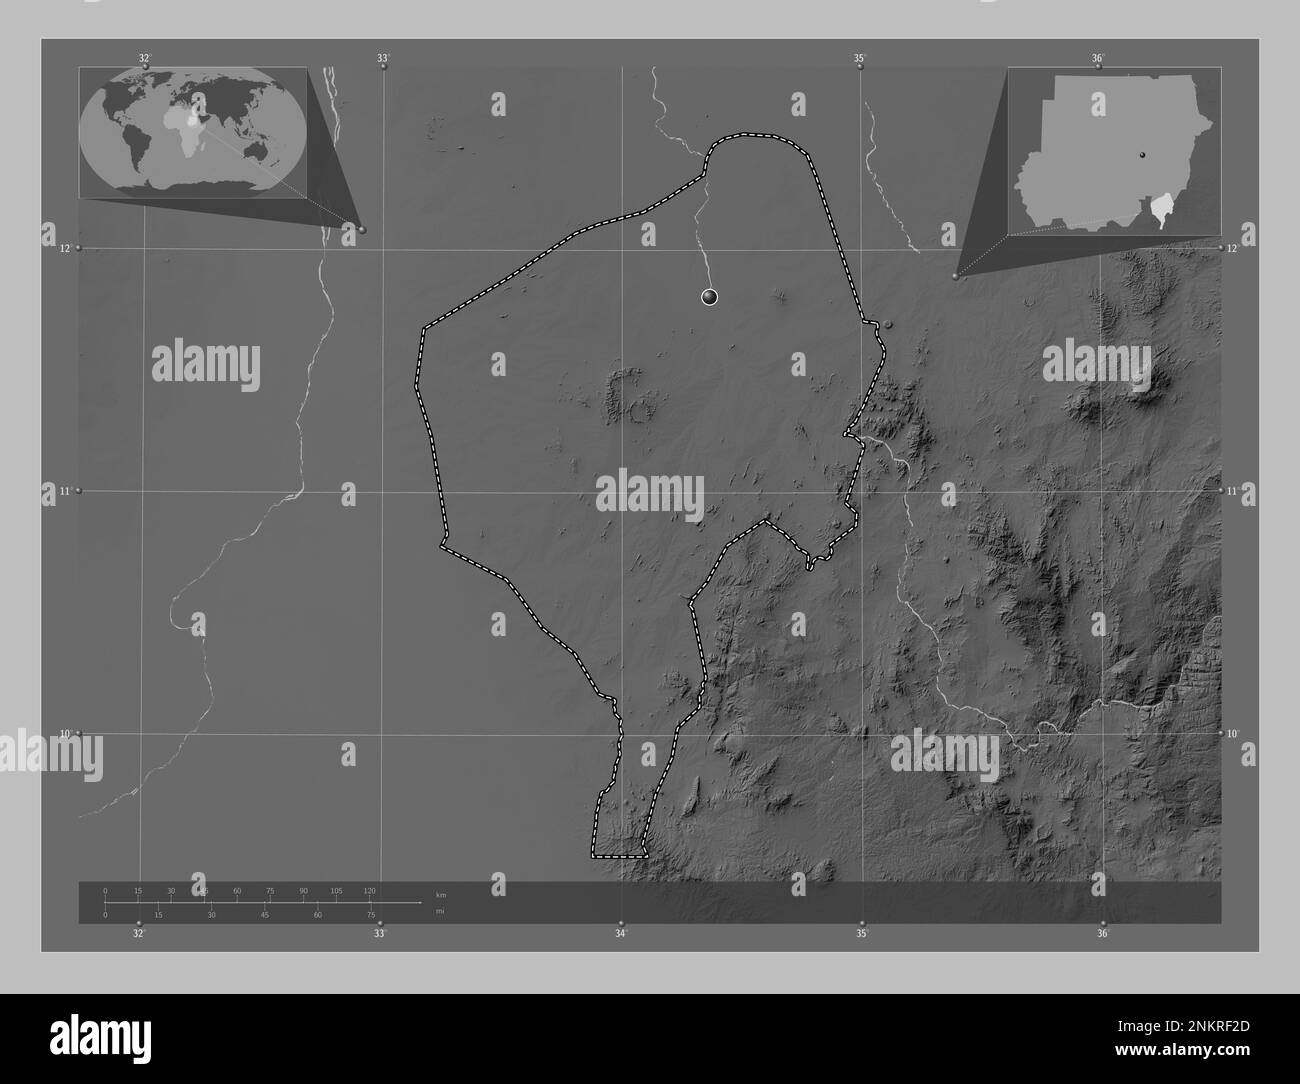 Blue Nile State Of Sudan Grayscale Elevation Map With Lakes And Rivers Corner Auxiliary Location Maps 2NKRF2D 